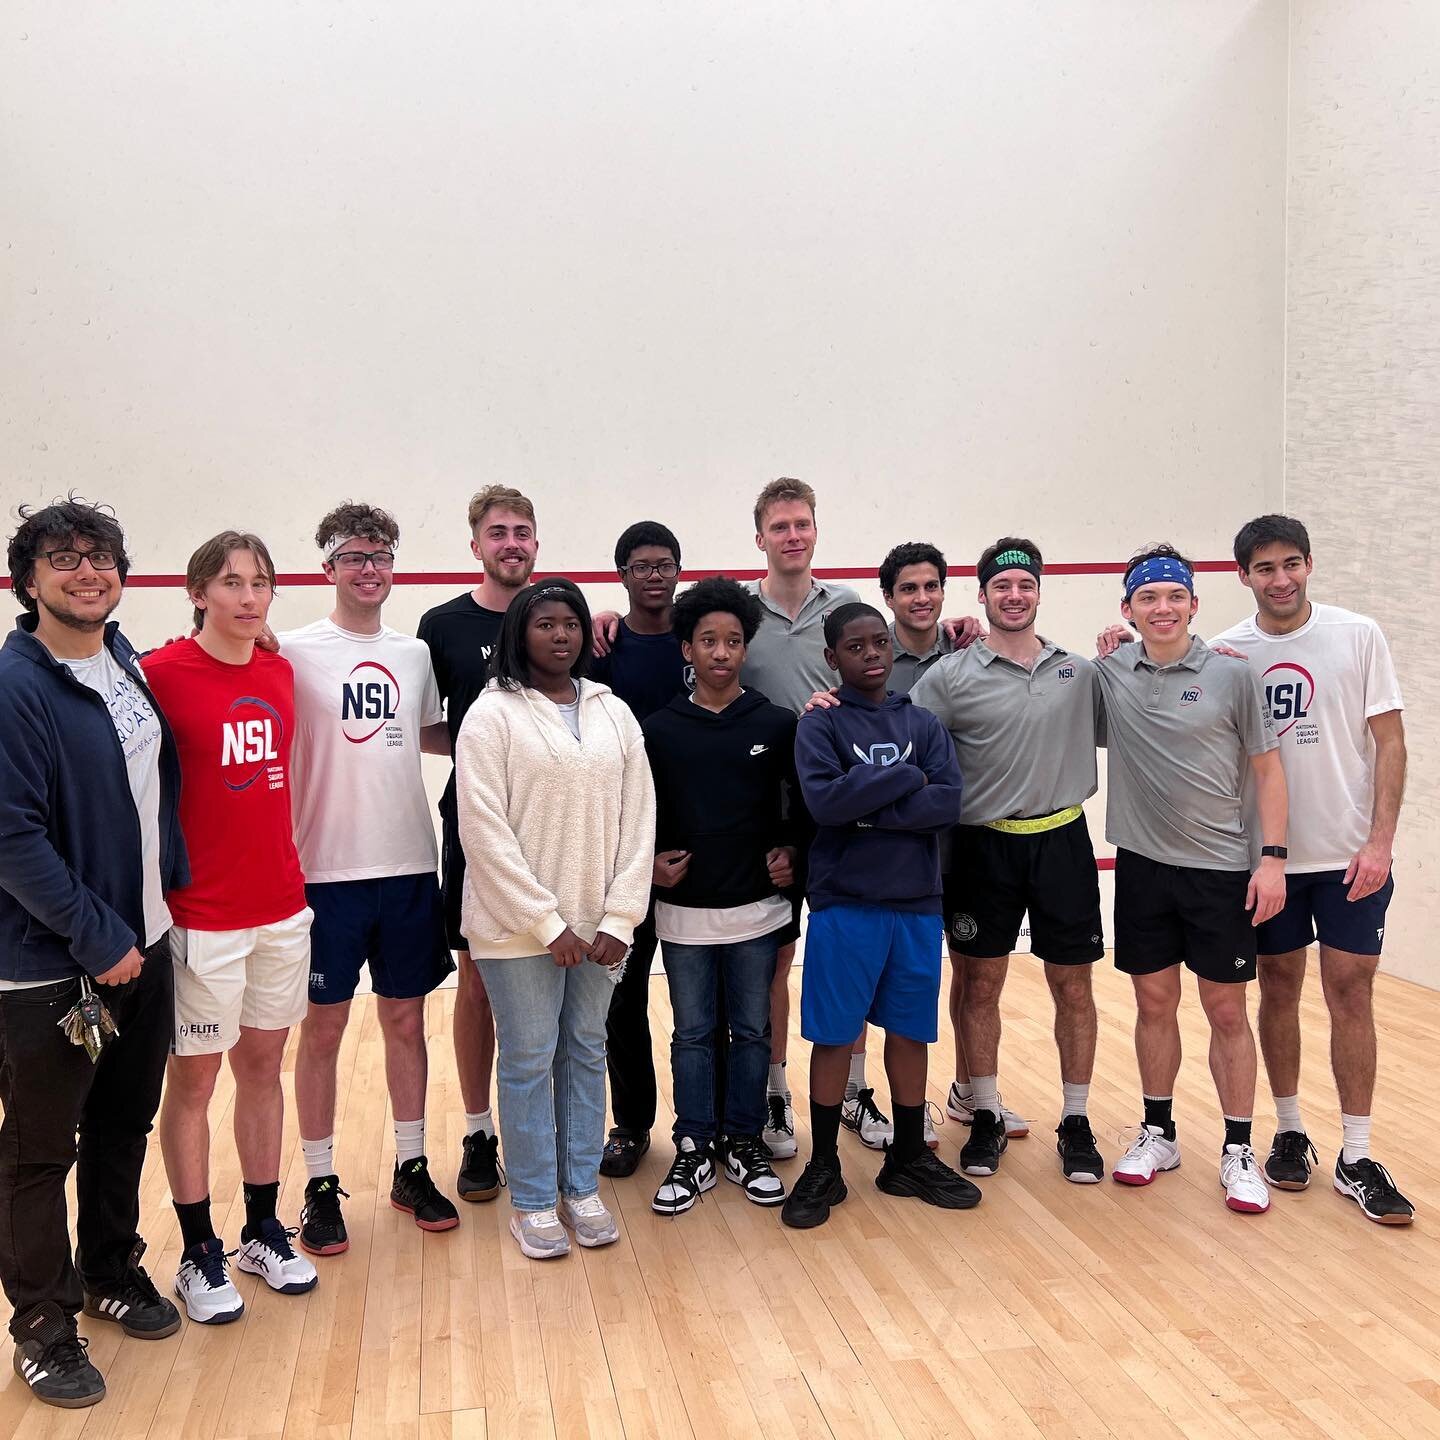 🌟 A+ Squash in Nashville, TN for the inaugural National Squash League draft! Our students spent their Saturday on an exciting trip to witness history at the first-ever NSL draft weekend. Shoutout to everyone who orchestrated this awesome event - we 